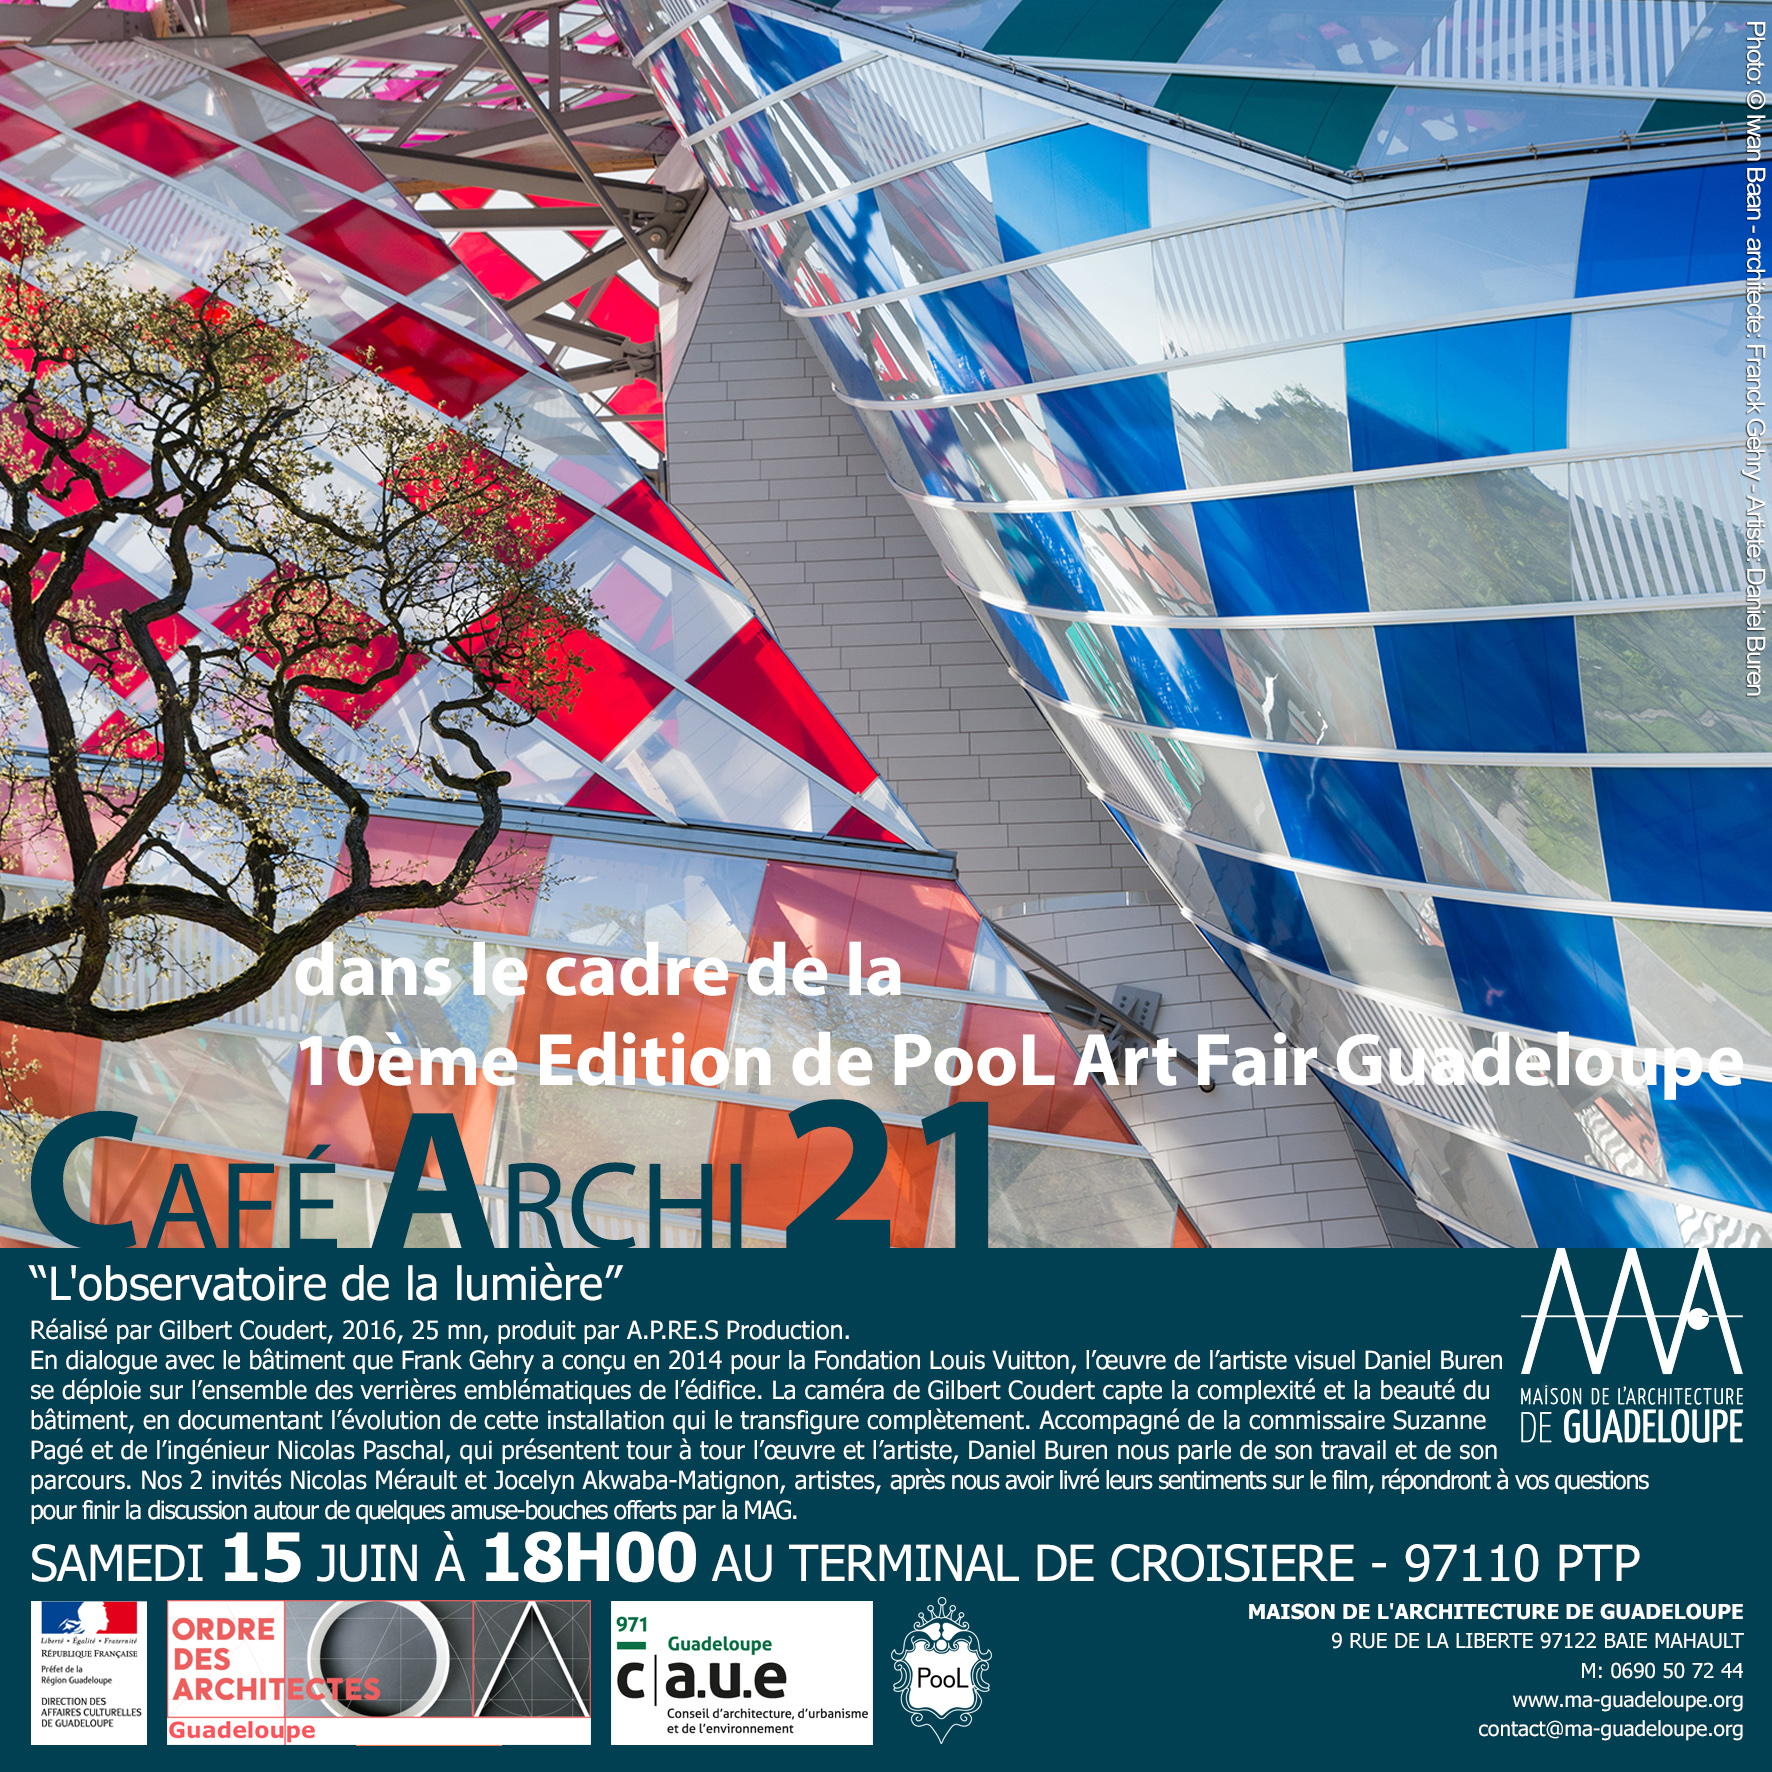 You are currently viewing Café Archi #21 @ Pool Art Fair